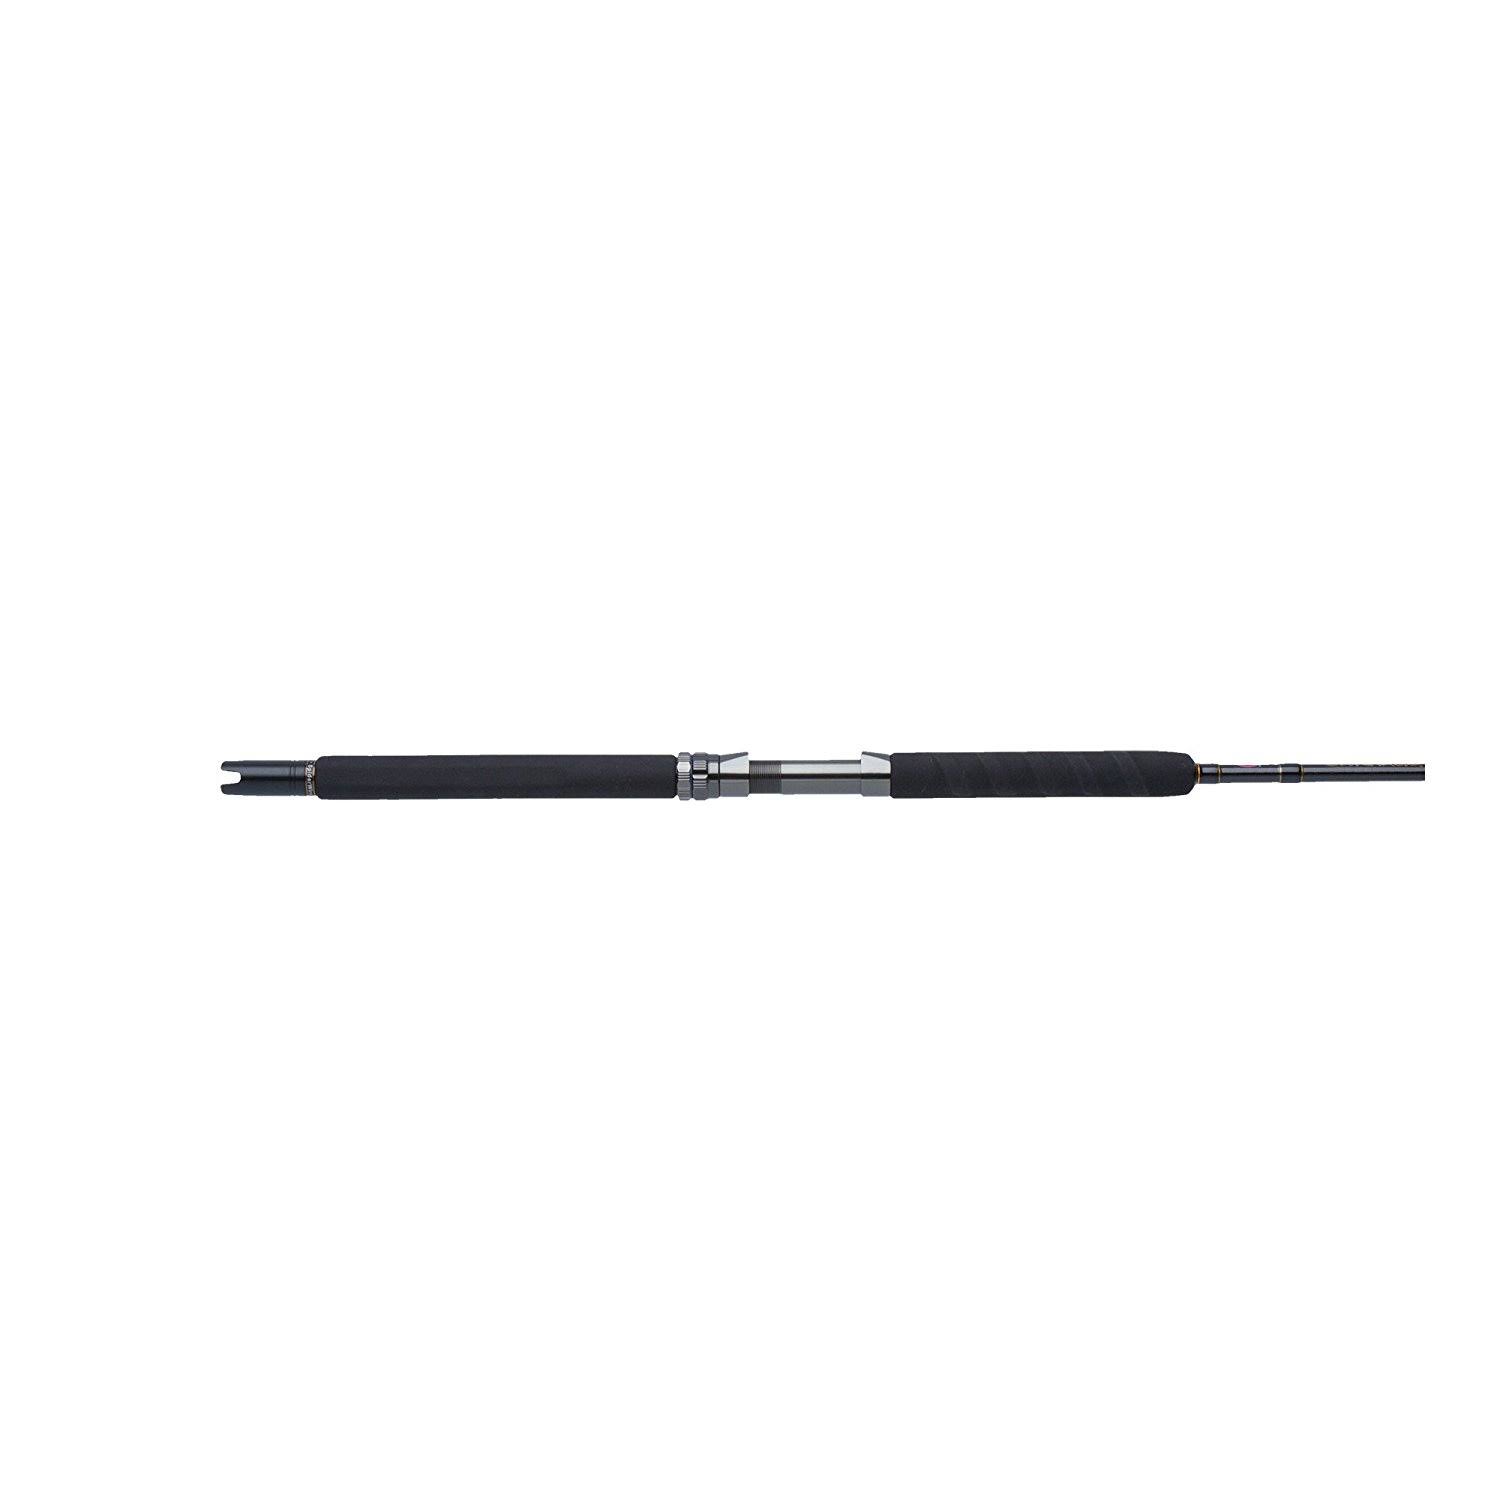 Penn Carnage II Boat Casting Rod | Boating & Fishing | Delivery Guaranteed | 30 Day Money Back Guarantee | Free Shipping On All Orders